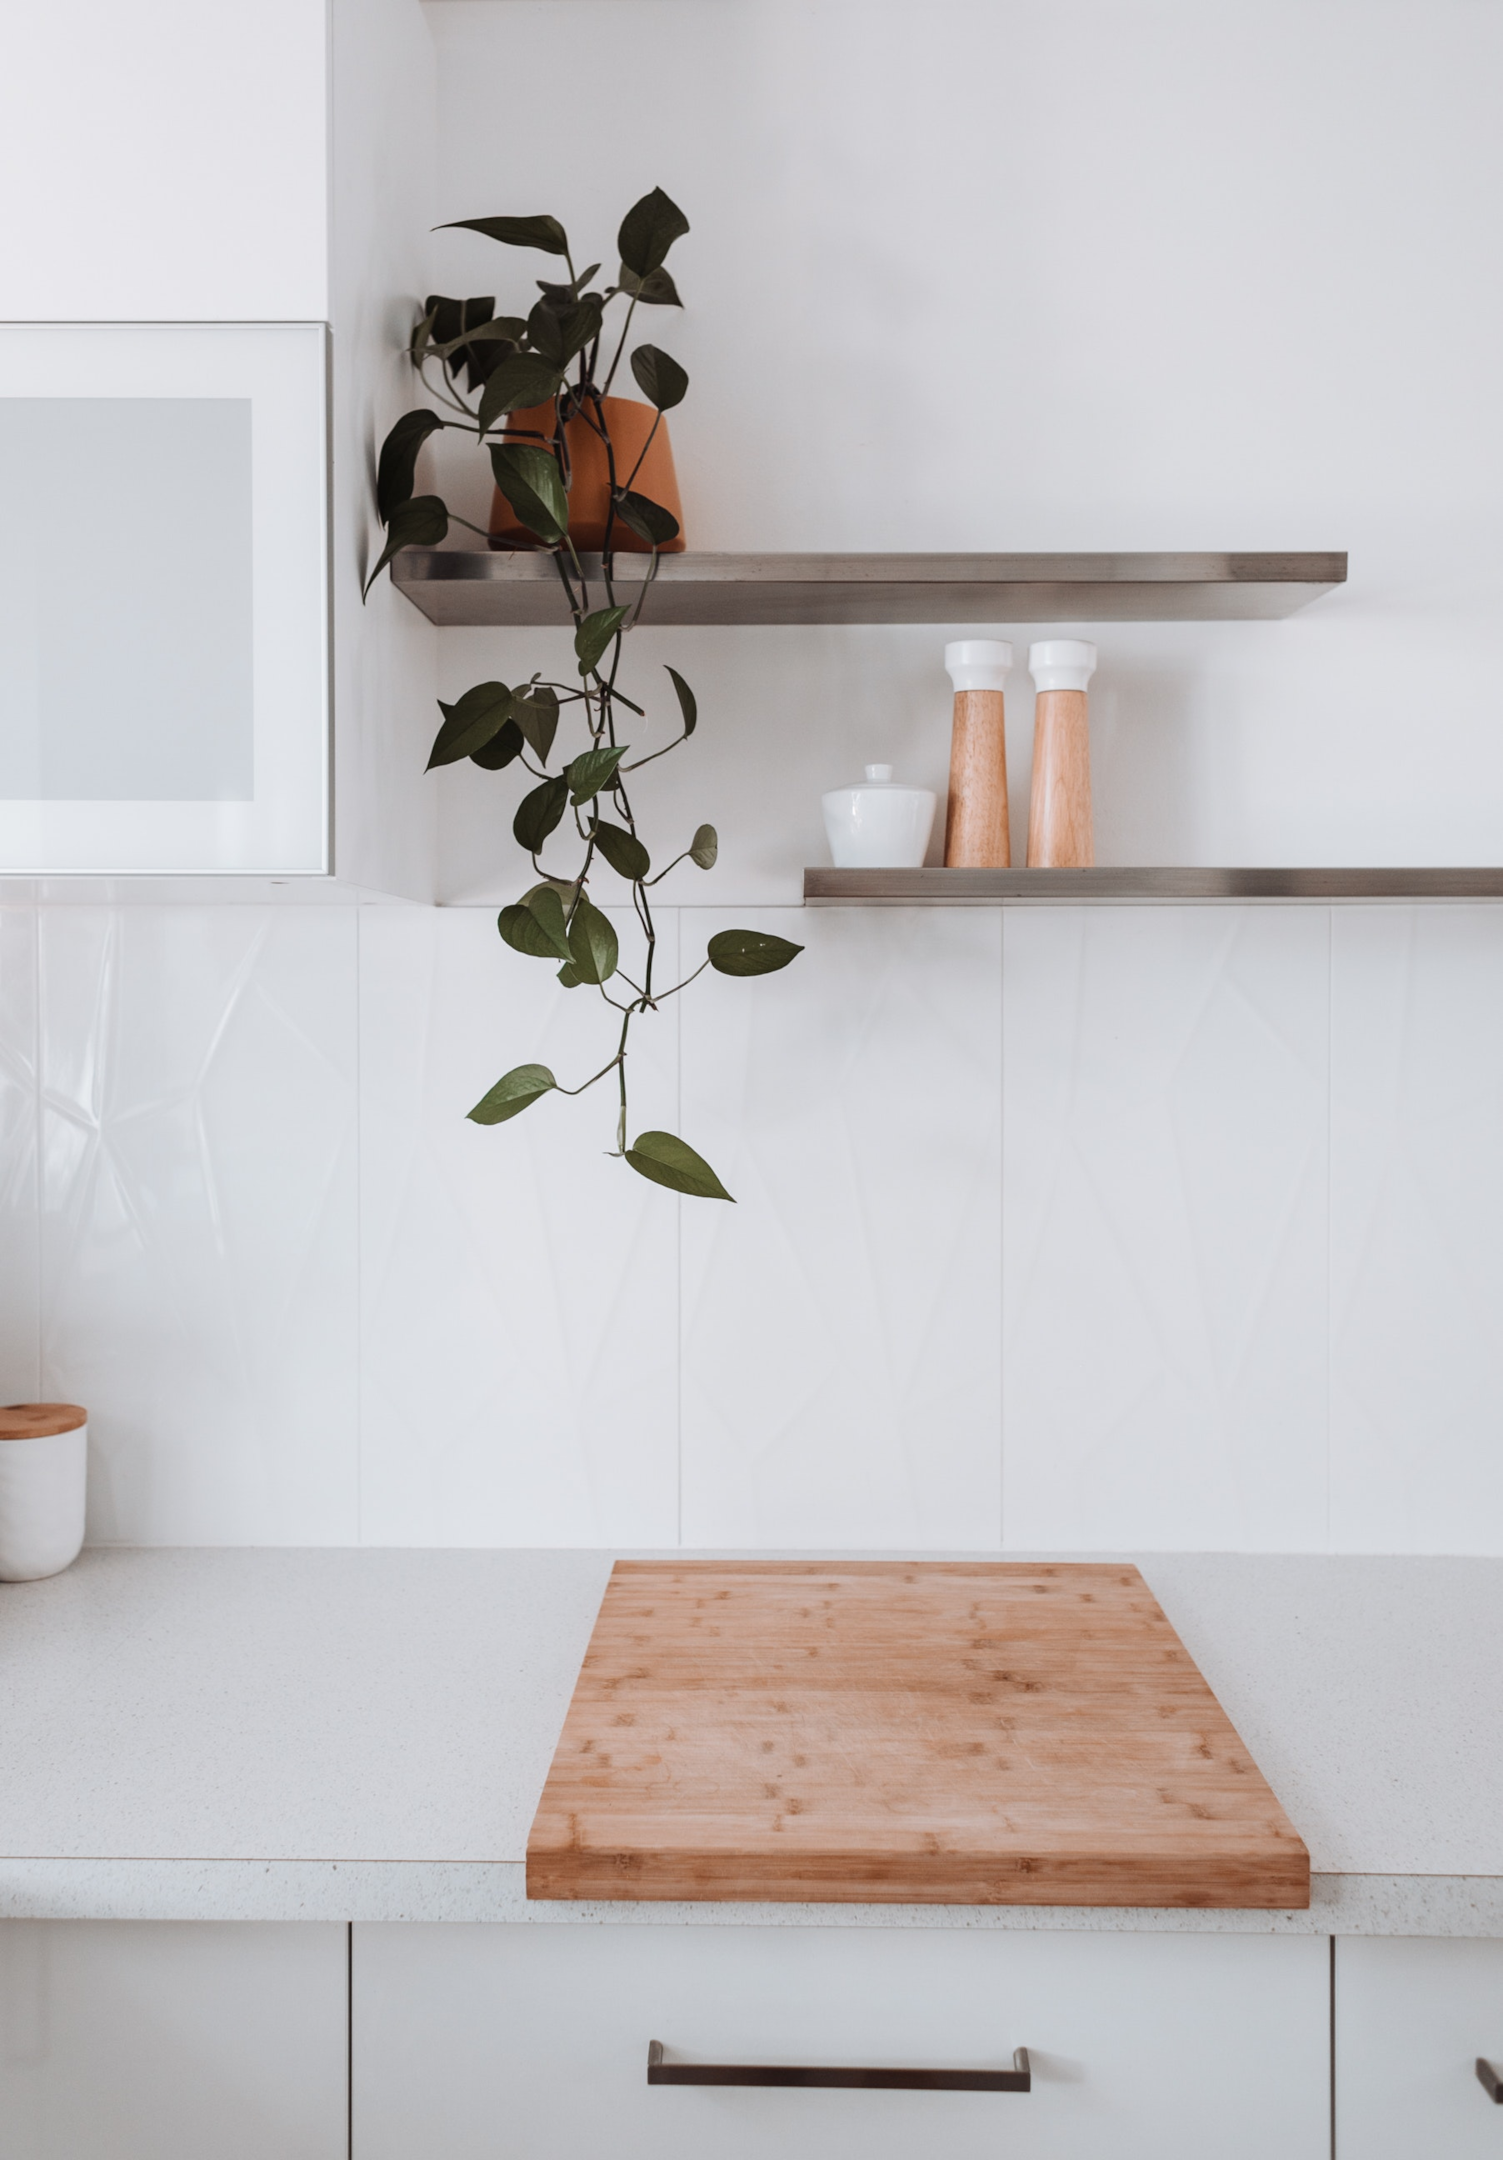 Photo by Rachel Claire: https://www.pexels.com/photo/interior-of-light-kitchen-in-modern-apartment-4992465/